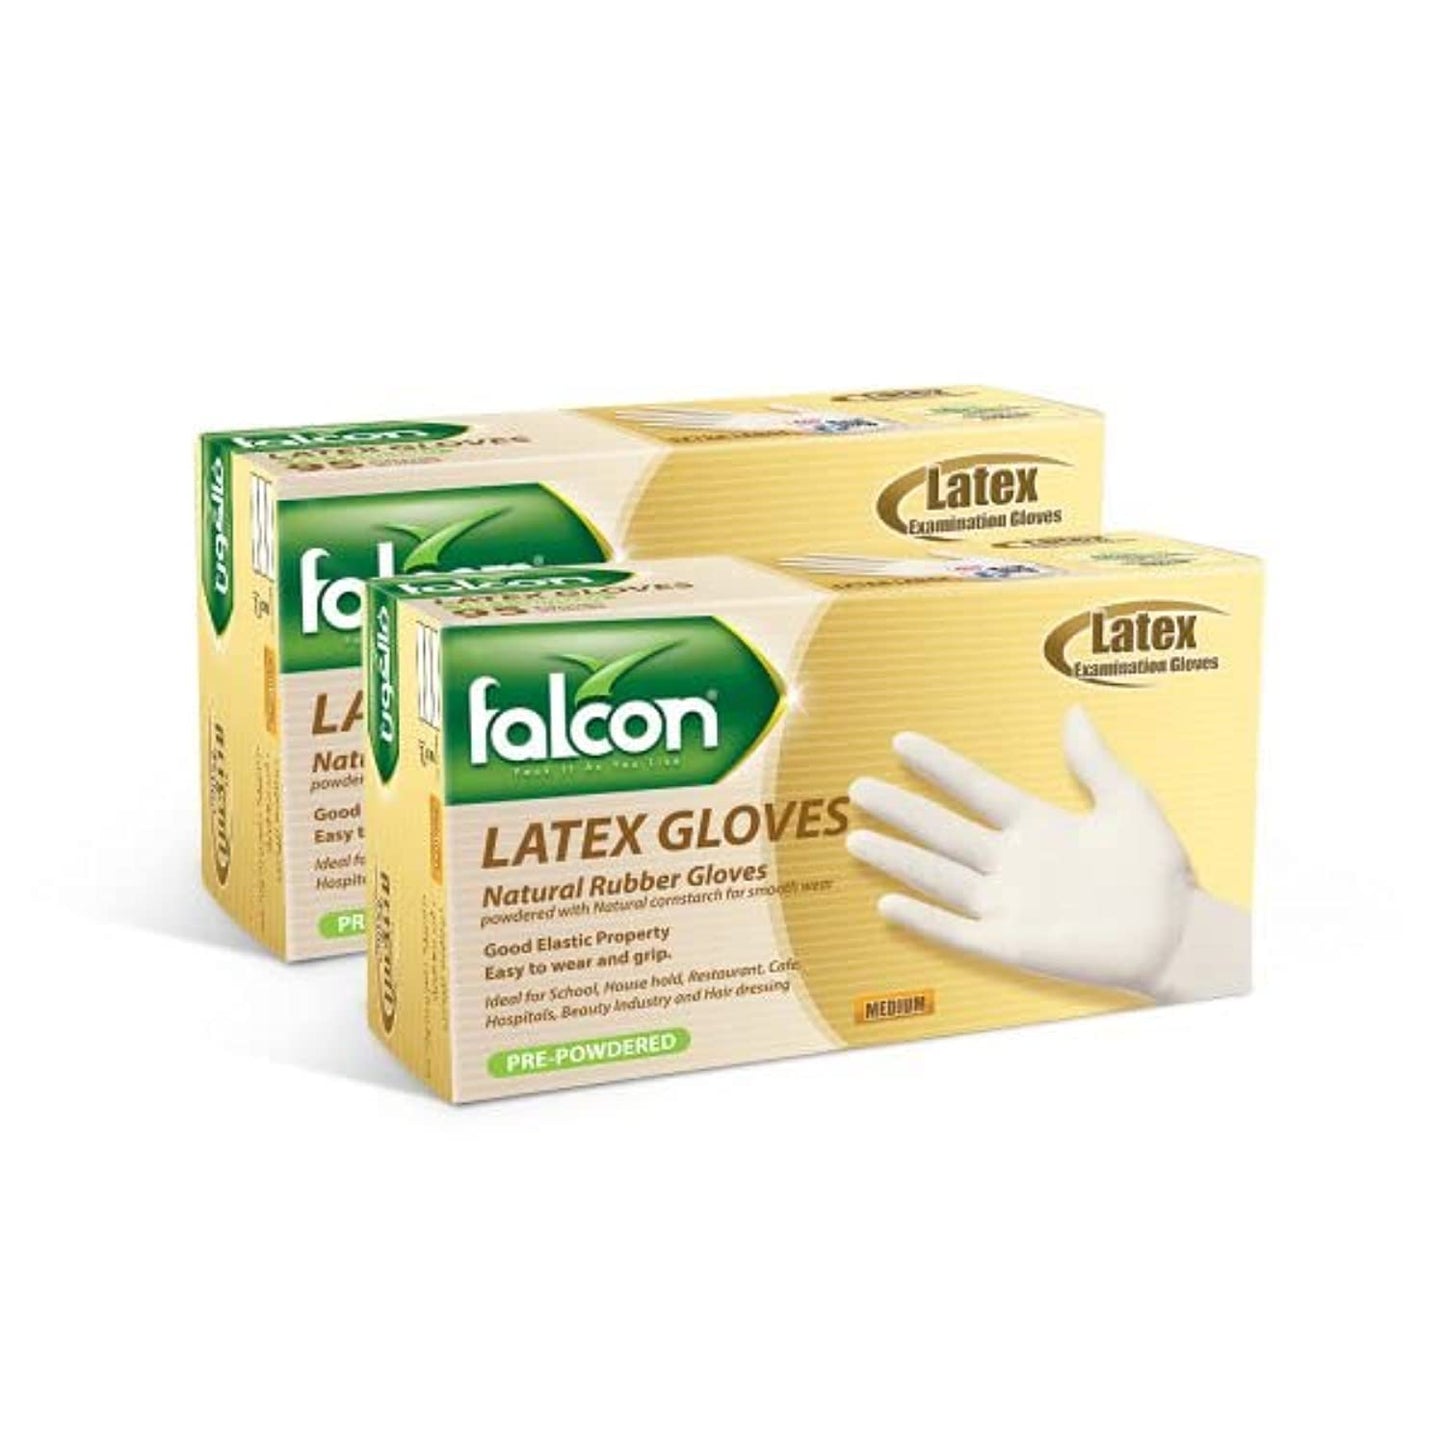 Falcon Latex Gloves With Powder, Pre-powdered |S, M, L, XL| (2 Packs x 100 Pieces)